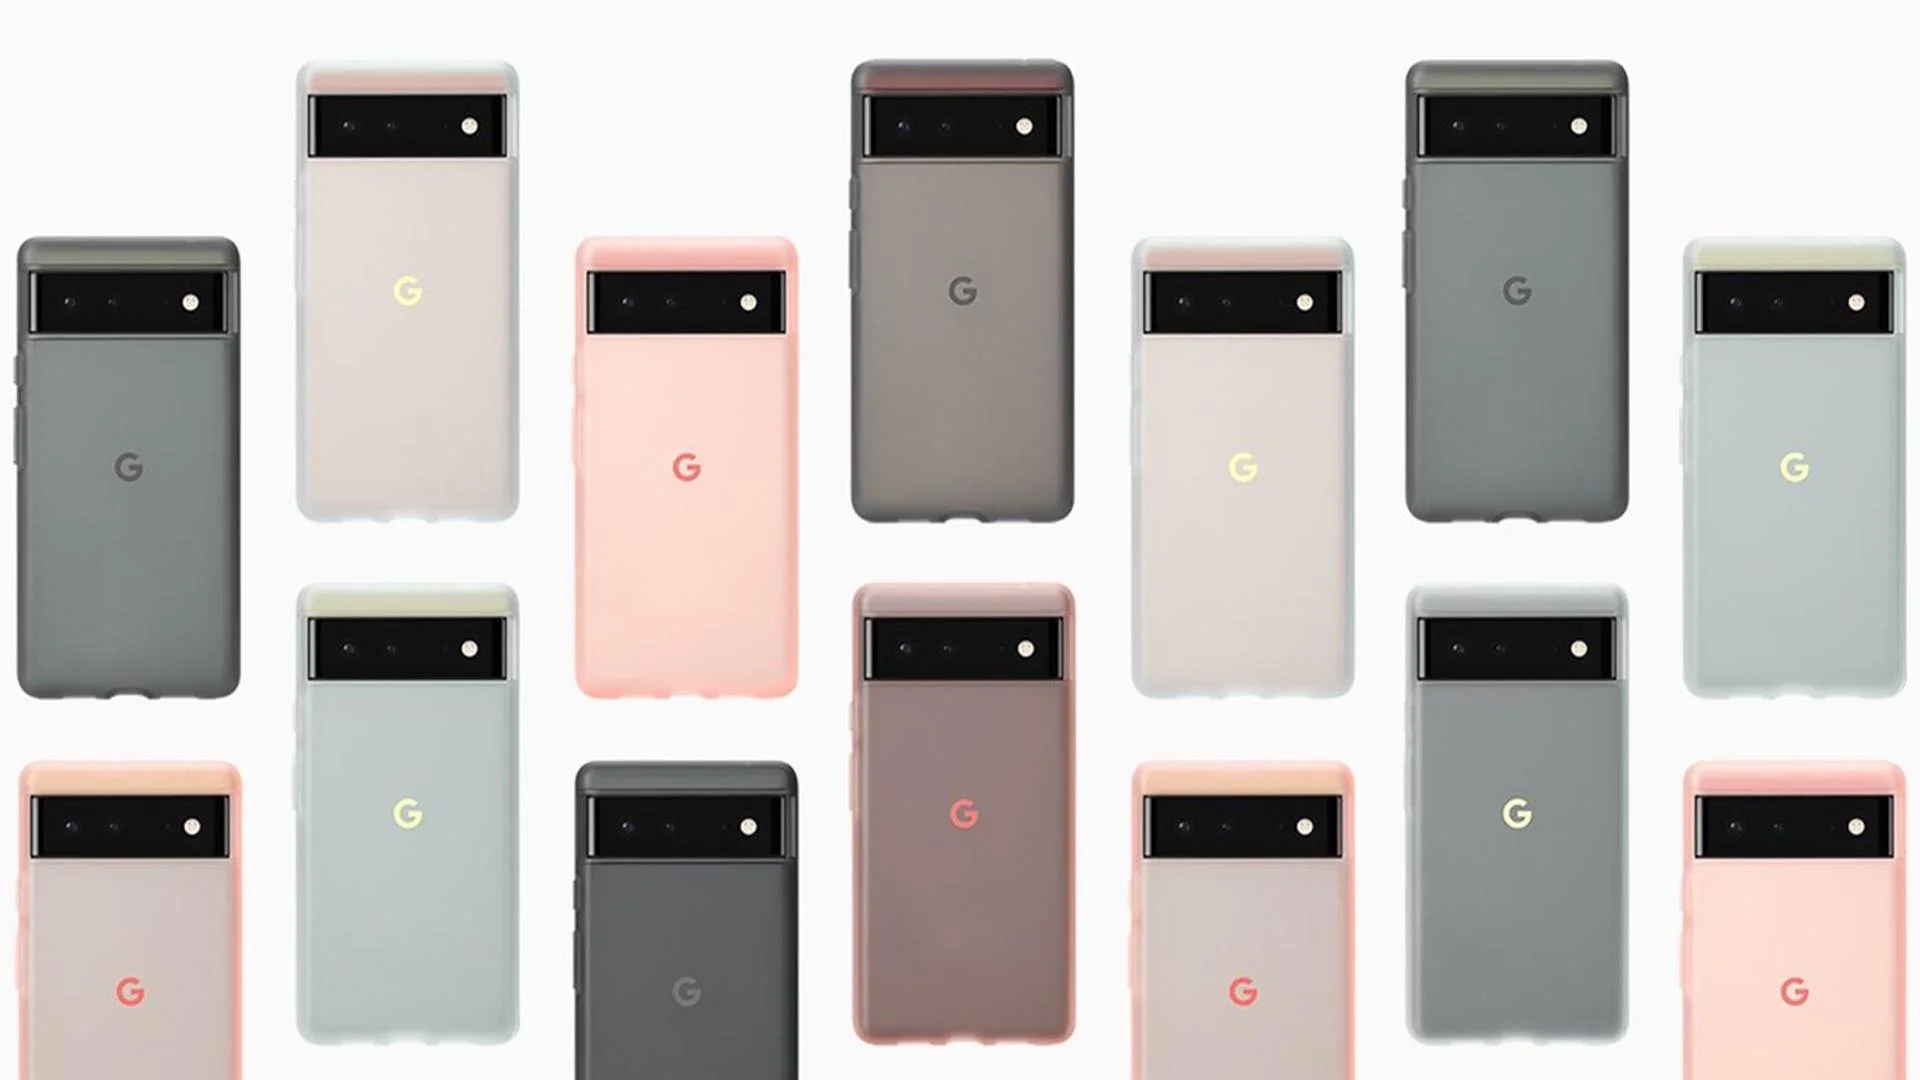 The first renders of the Google Pixel 7 design have appeared